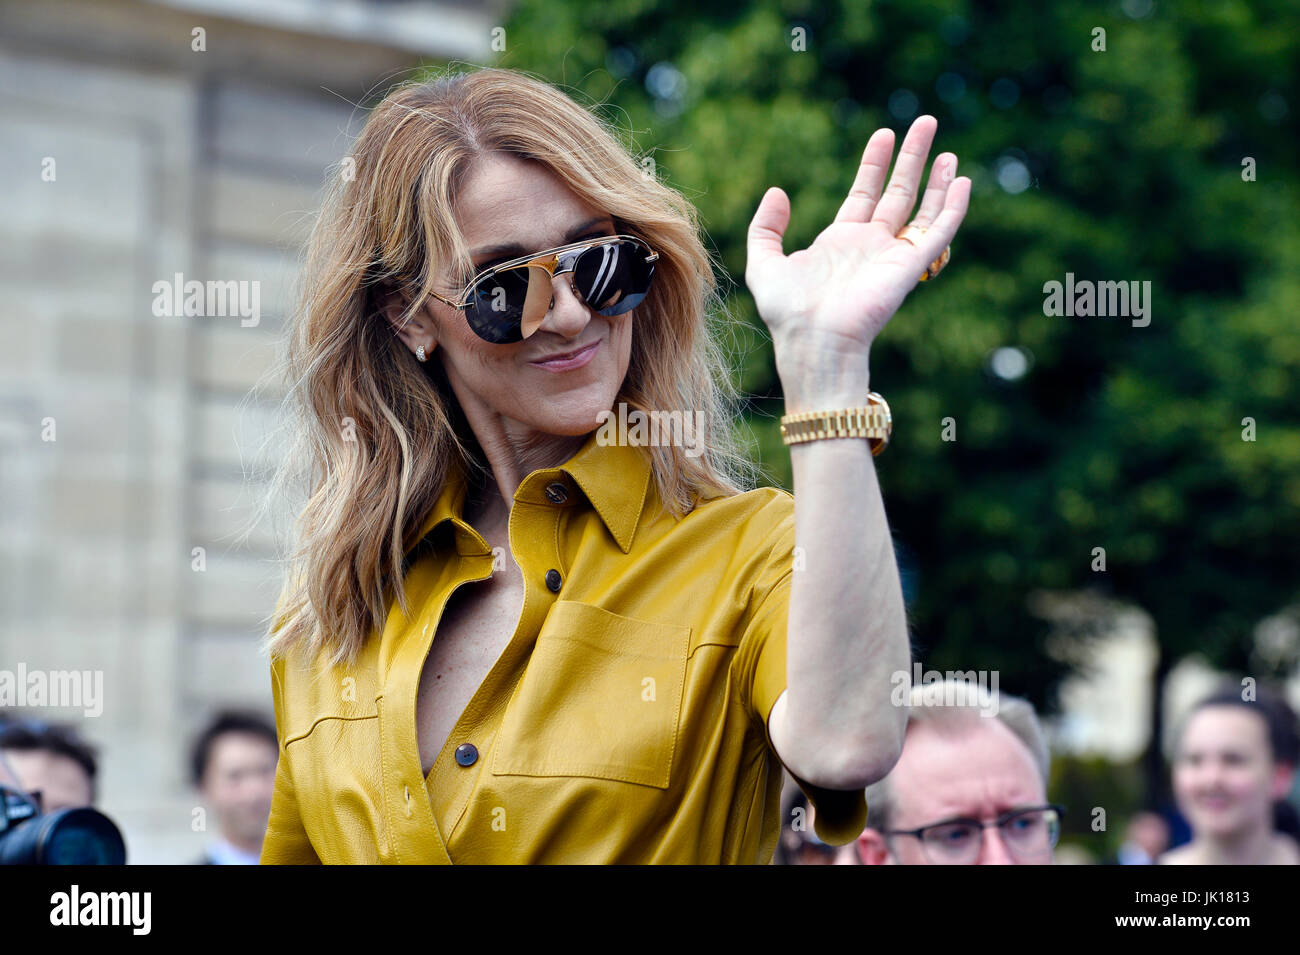 Celine Dion High Resolution Stock Photography and Images - Alamy